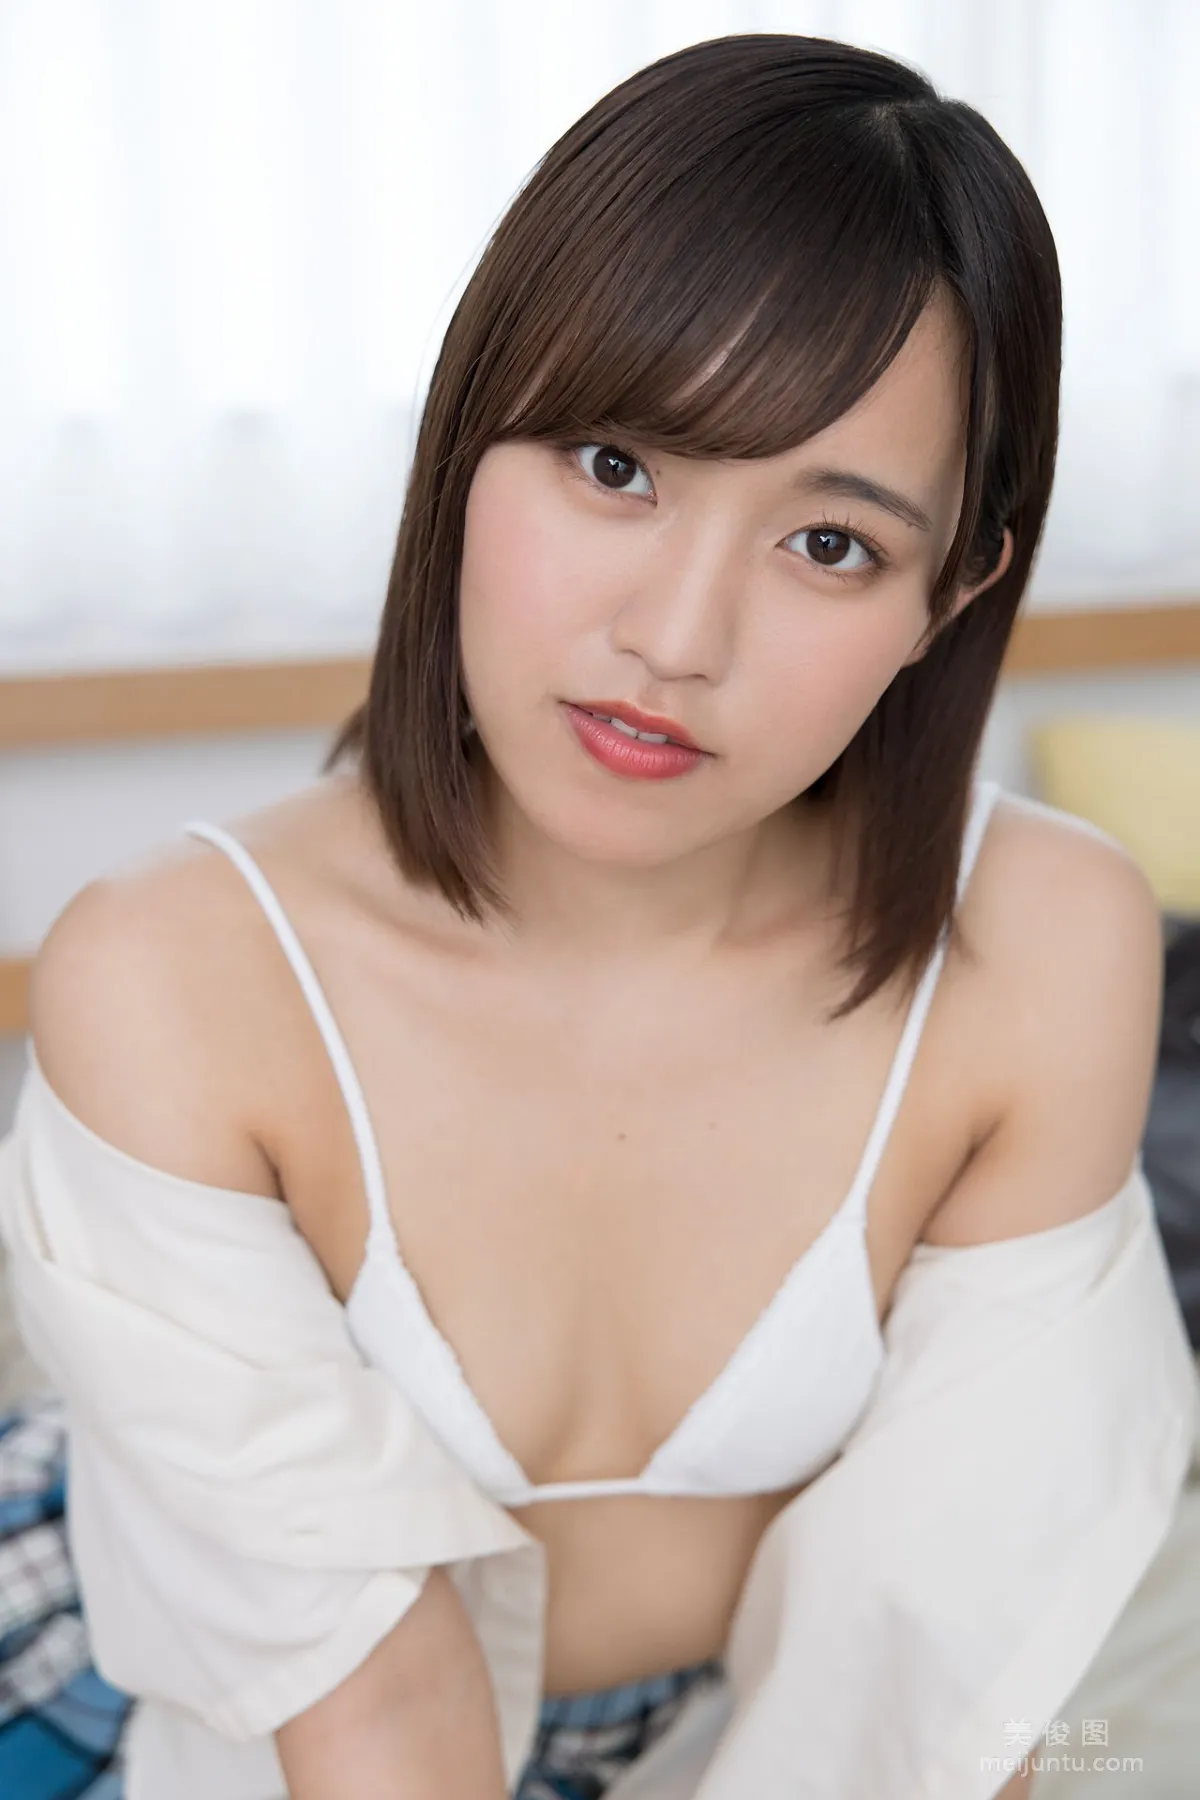 [Minisuka.tv] 香月りお - Limited Gallery 21.137